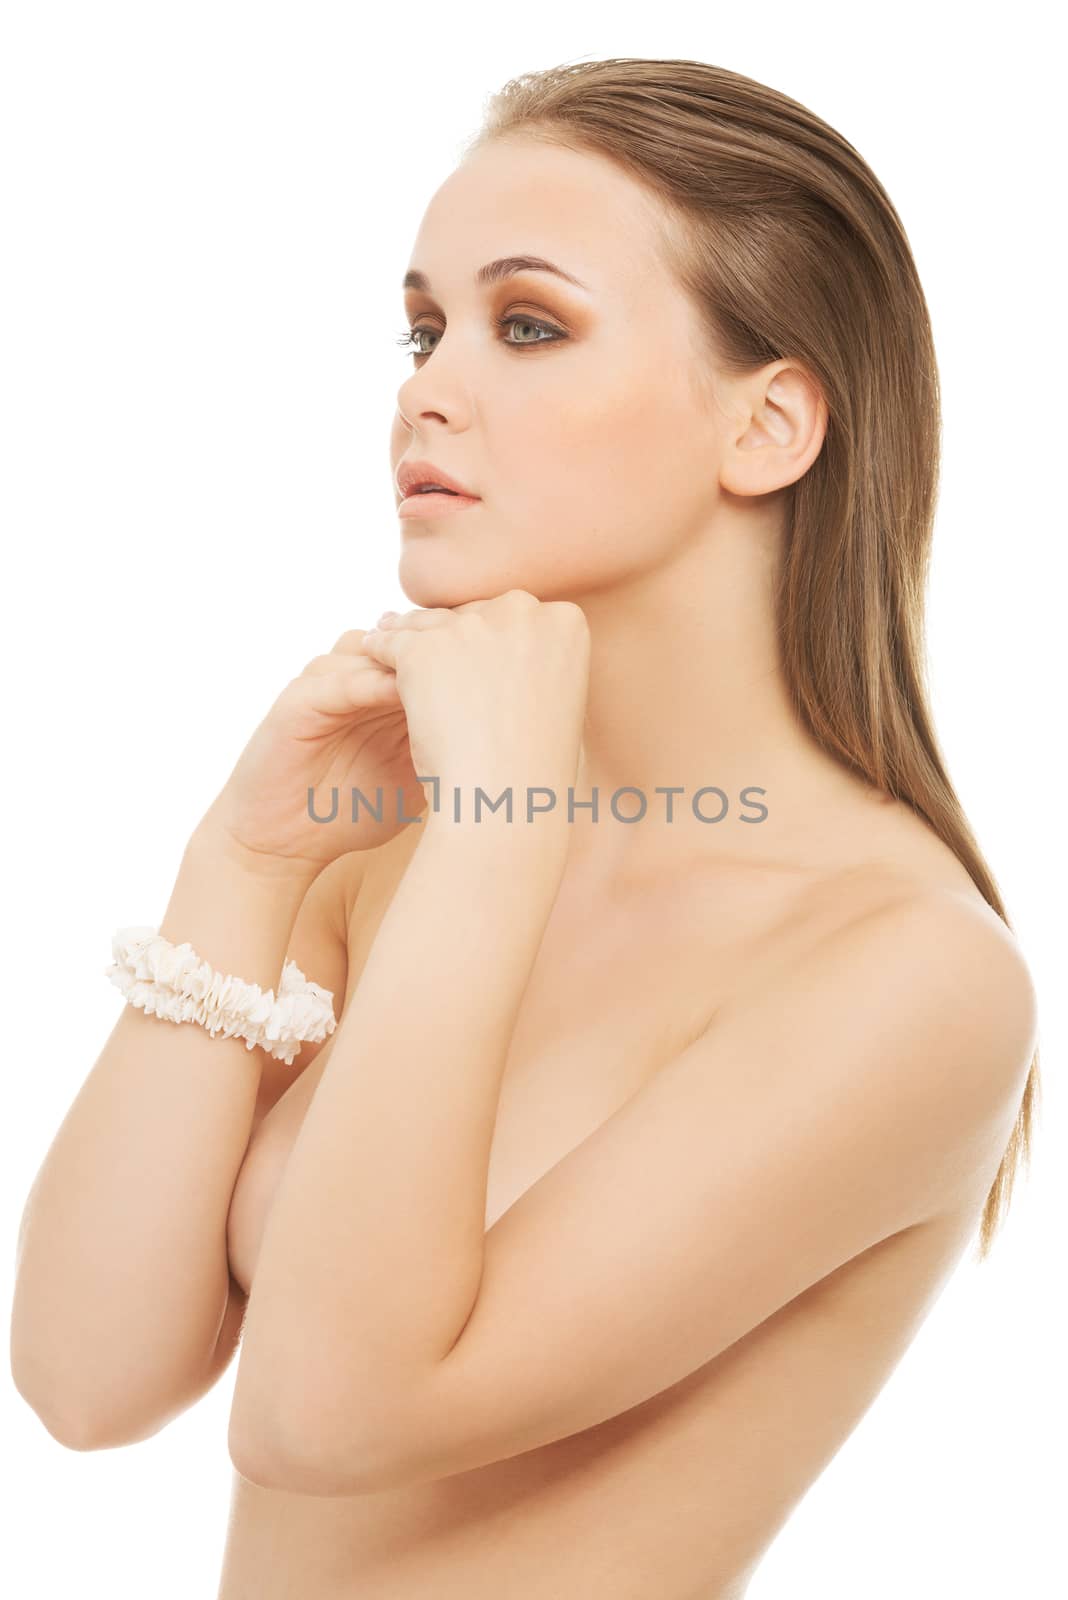 Attractive naked woman with hands close to face. Isolated on white.